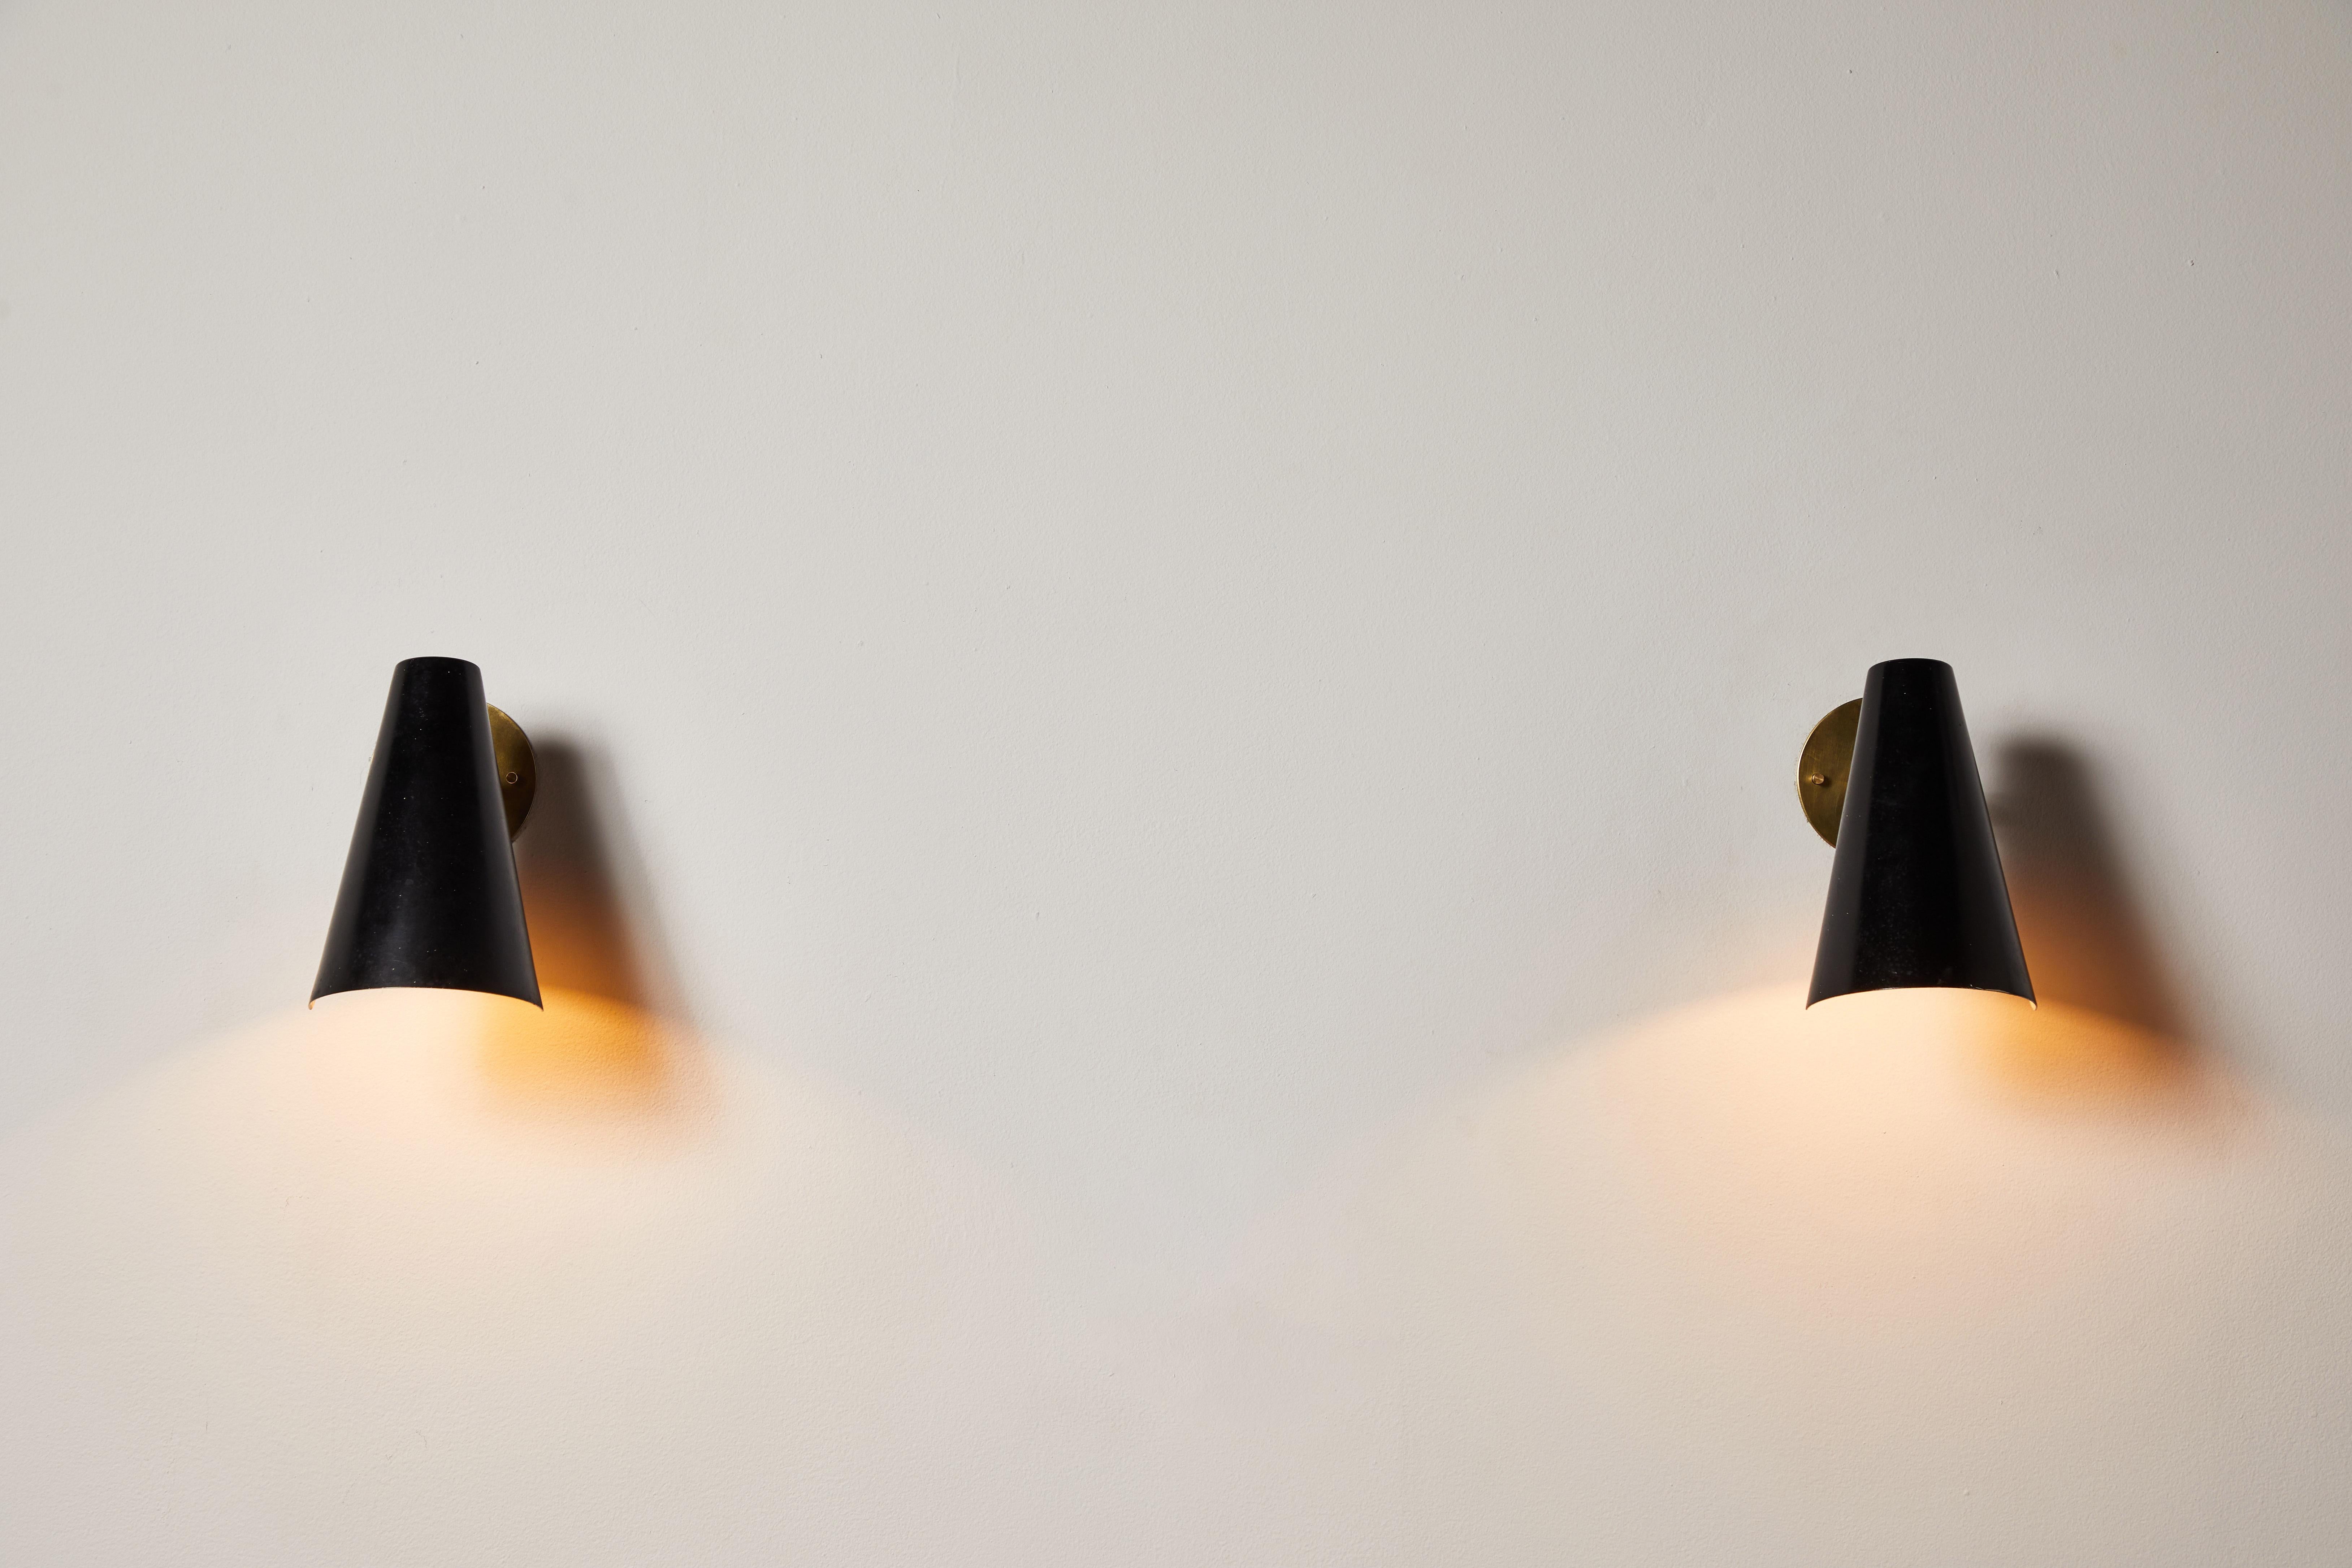 Pair of sconces by Gino Sarfatti for Arteluce. Designed and manufactured in Italy, circa 1950s. Lacquered metal, brass. Rewired for U.S. standards. Shades articulate to various positions. We recommend one E27 100w maximum bulbs per light. Bulbs